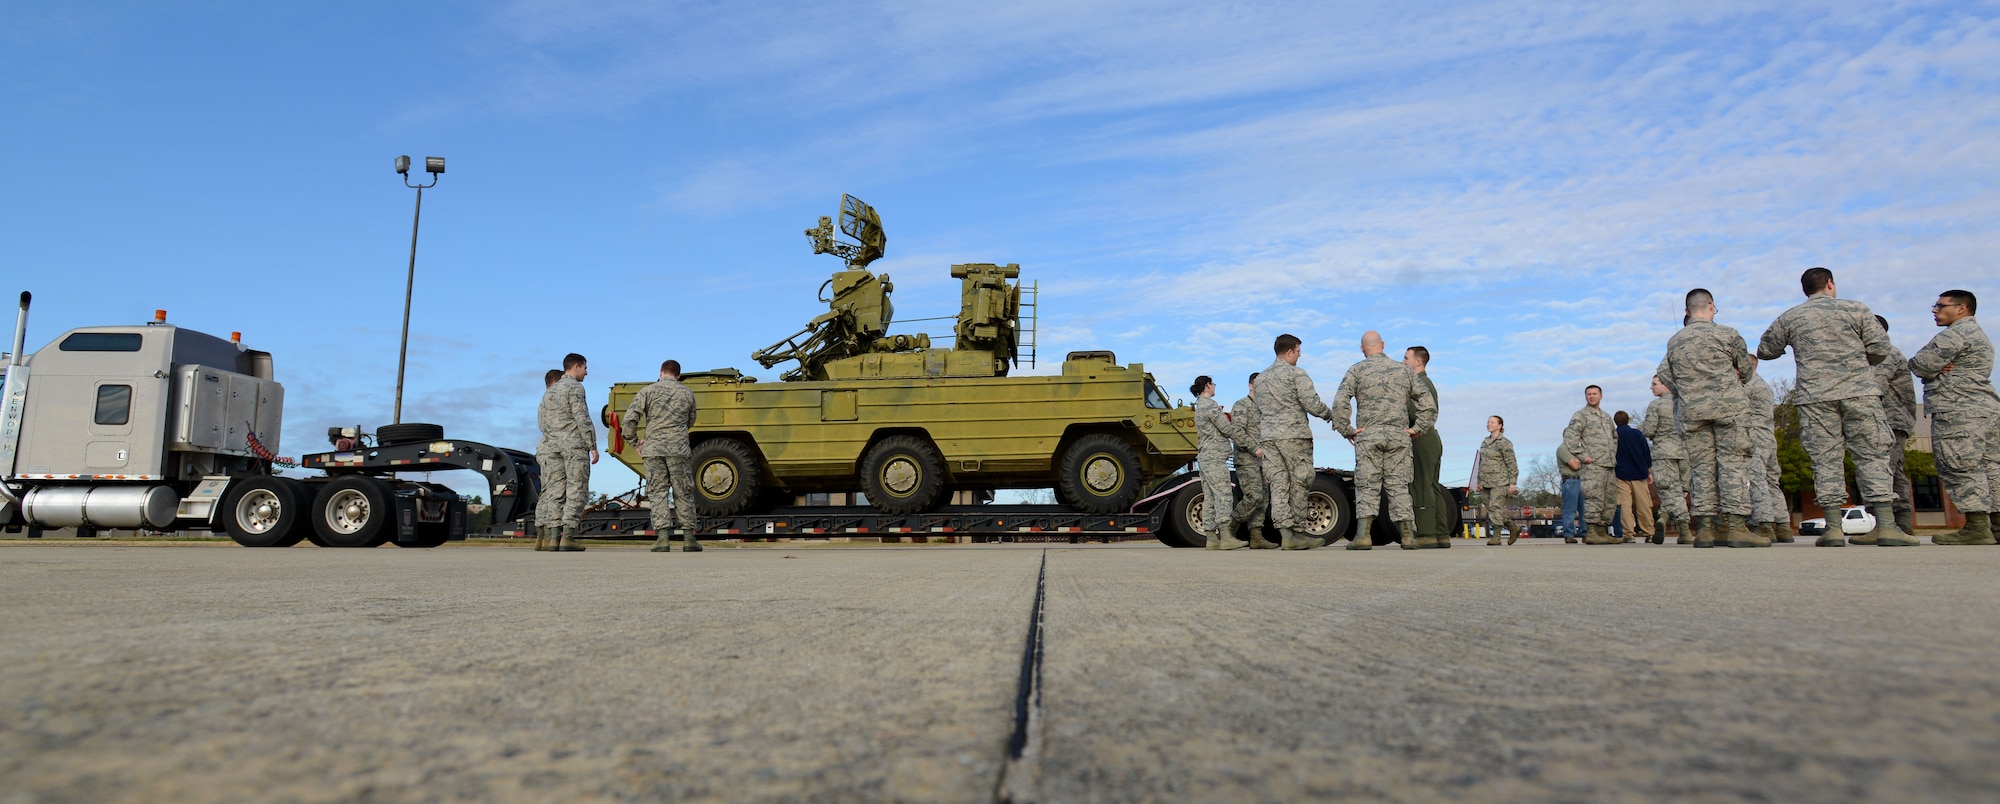 U.S. Airmen participate in a “show and tell” of an SA-8 Gecko “Land Roll” Launcher surface-to-air missile system at Shaw Air Force Base, S.C., Jan. 20, 2017. Approximately 150-200 Team Shaw members from various career fields across the base participated in the event. (U.S. Air Force photo by Airman 1st Class Kelsey Tucker)